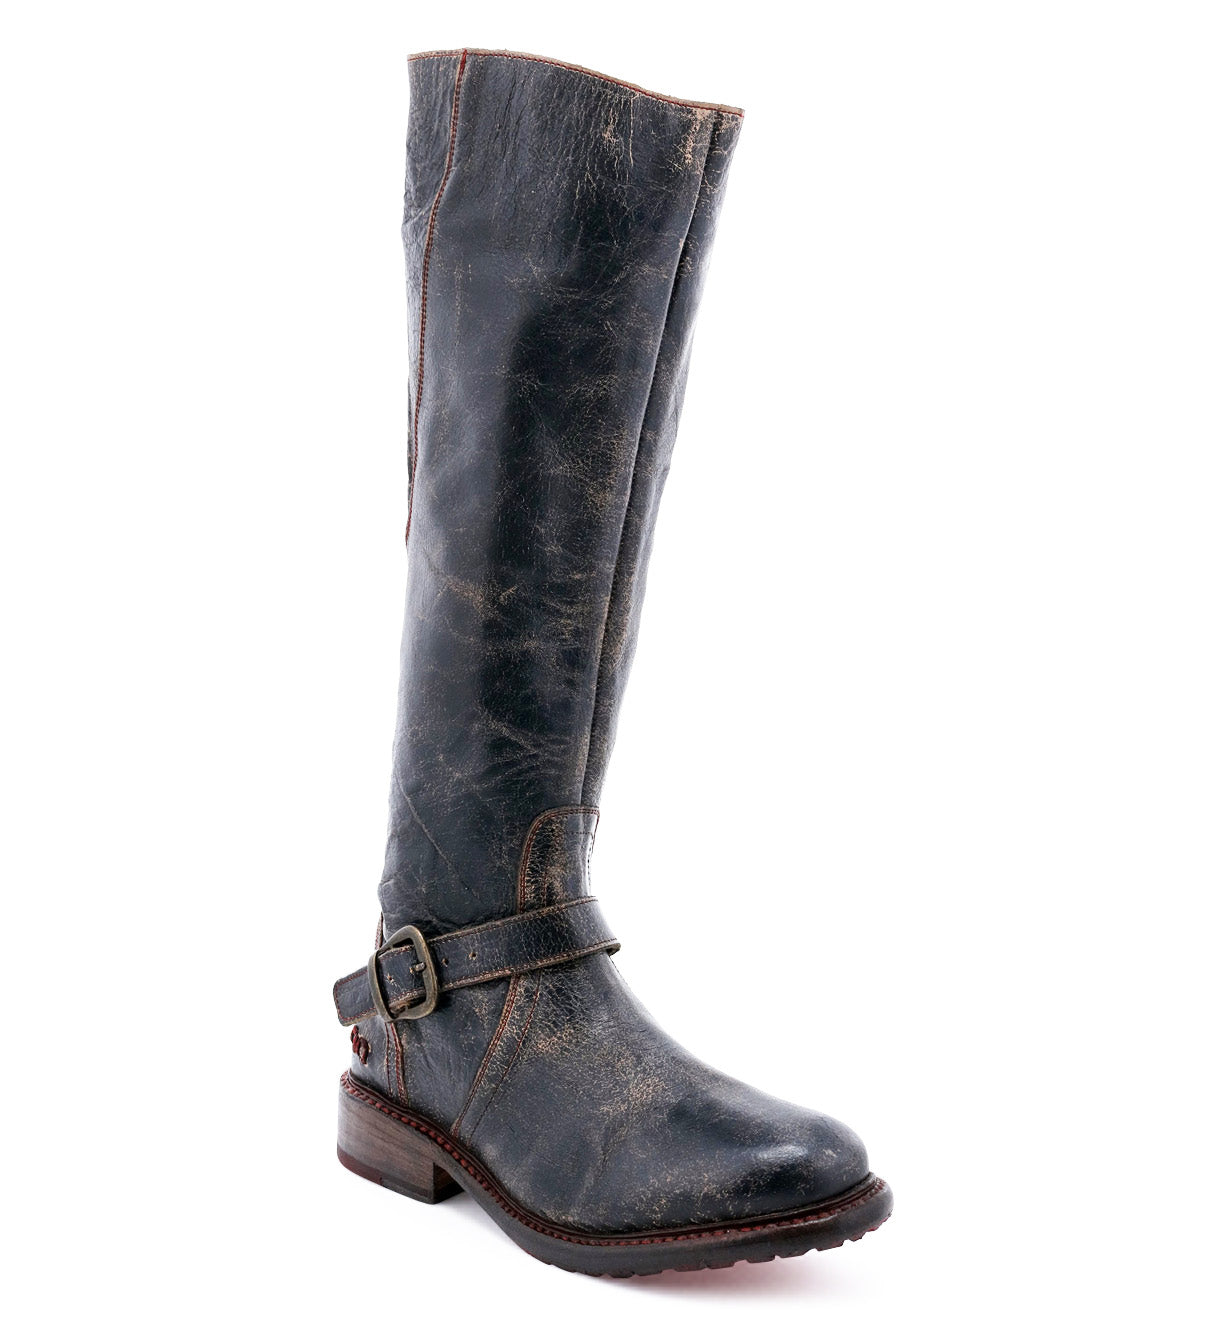 A women's black leather Glaye riding boot with buckles by Bed Stu.